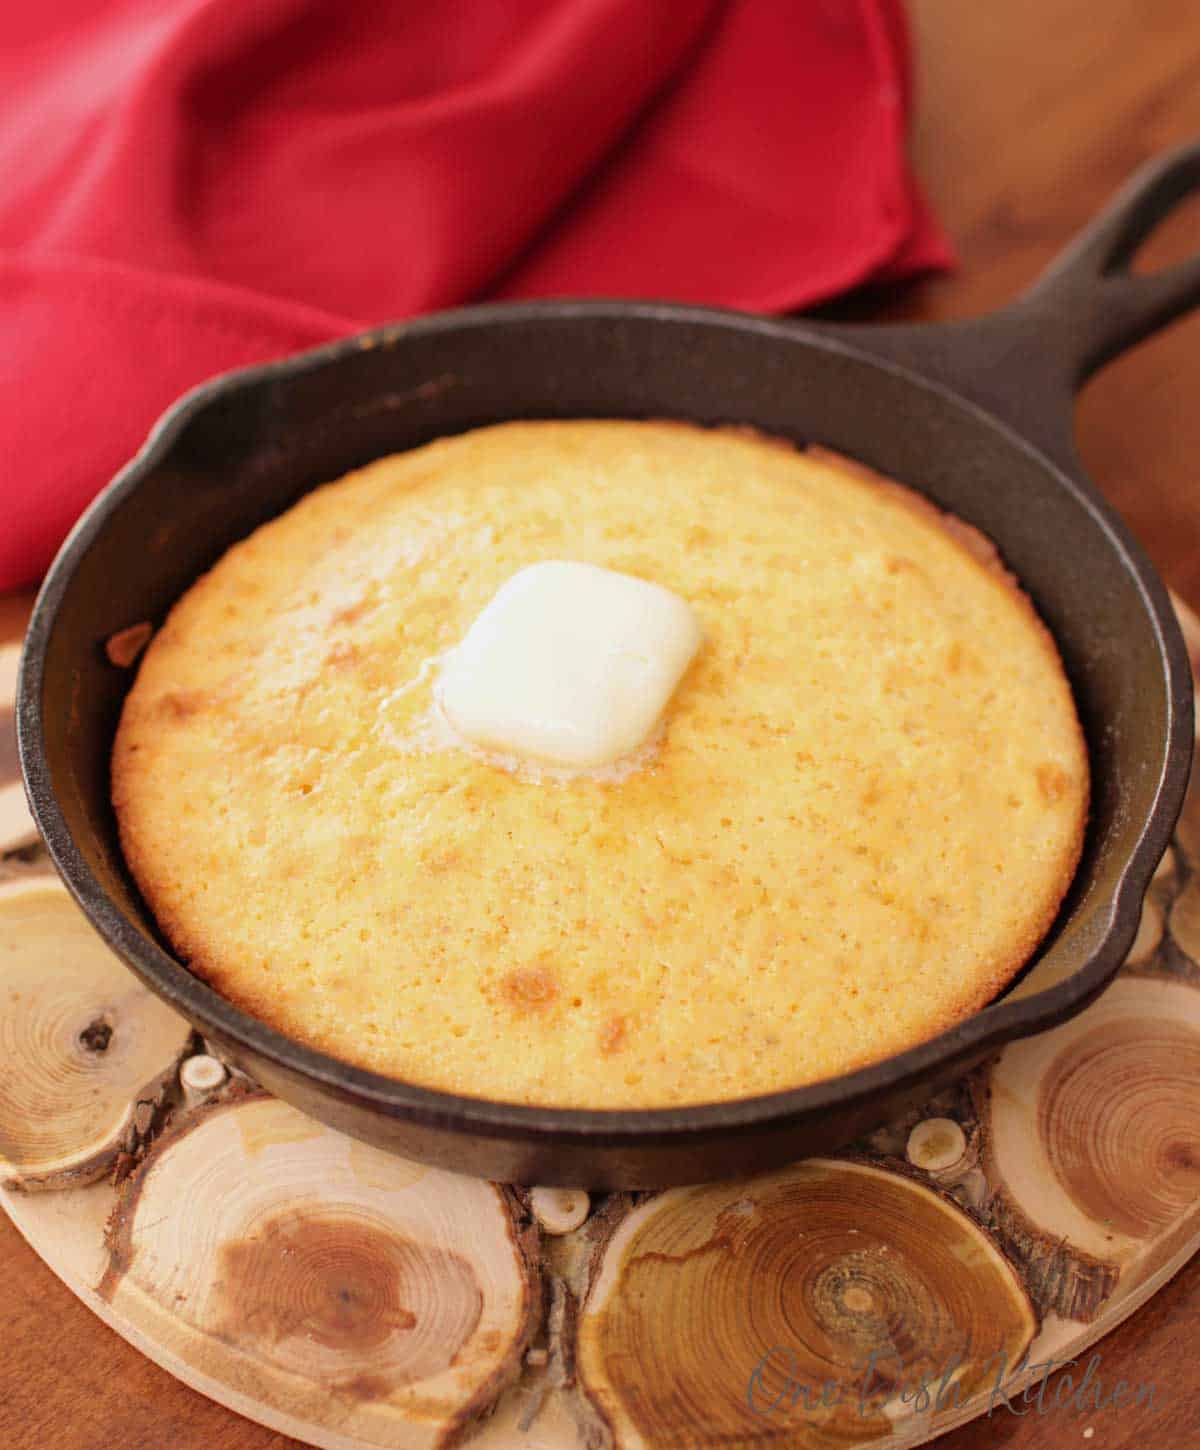 Butter melting on cornbread in a cast iron skillet on a wooden trivet next to a red cloth napkin.